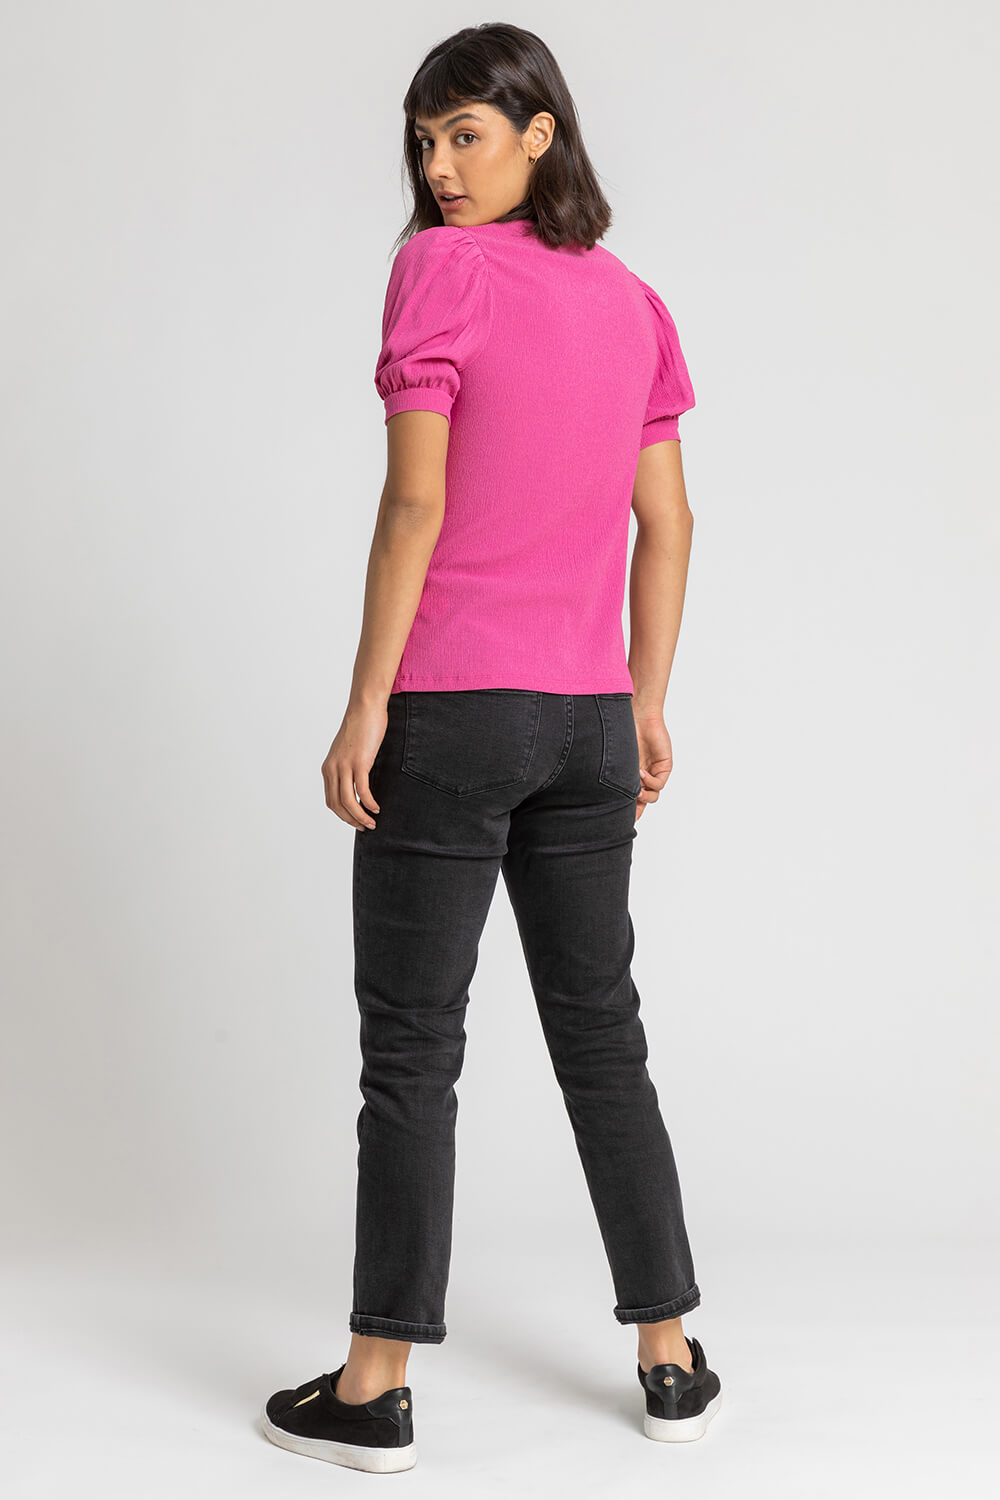 PINK Textured Puff Sleeve Jersey Top, Image 2 of 4